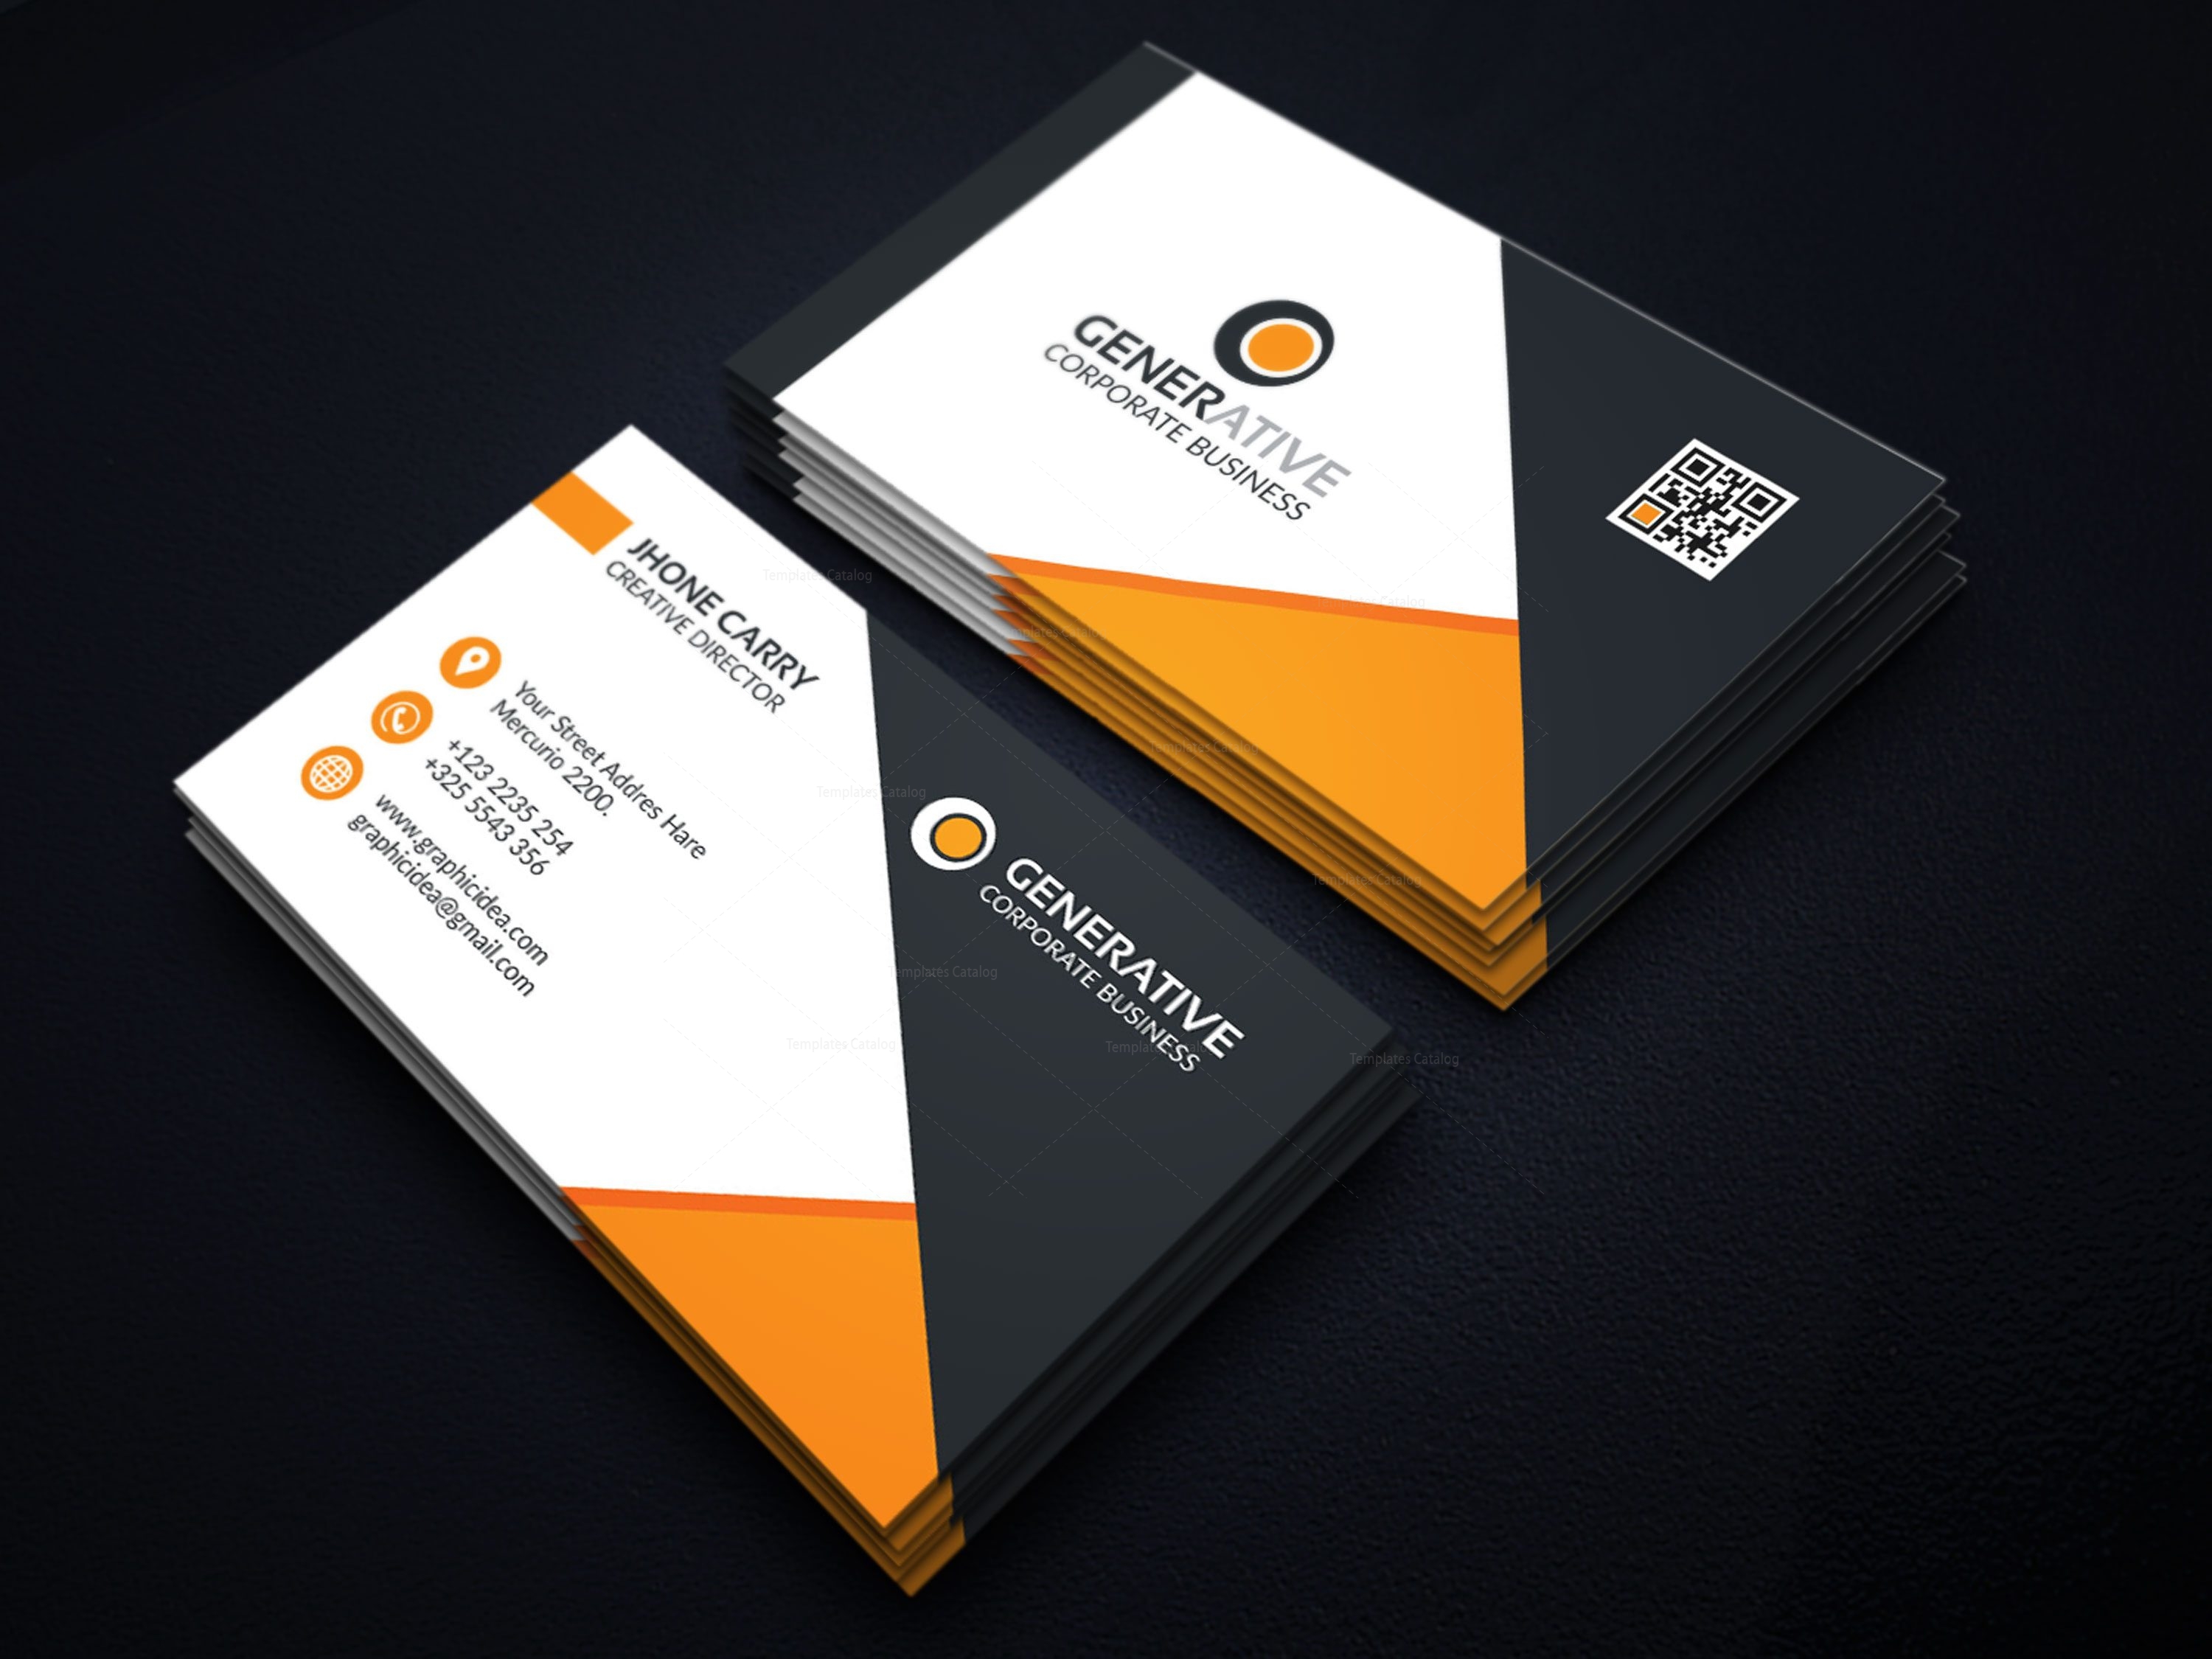 Do business card design professional business card for $5 - SEOClerks